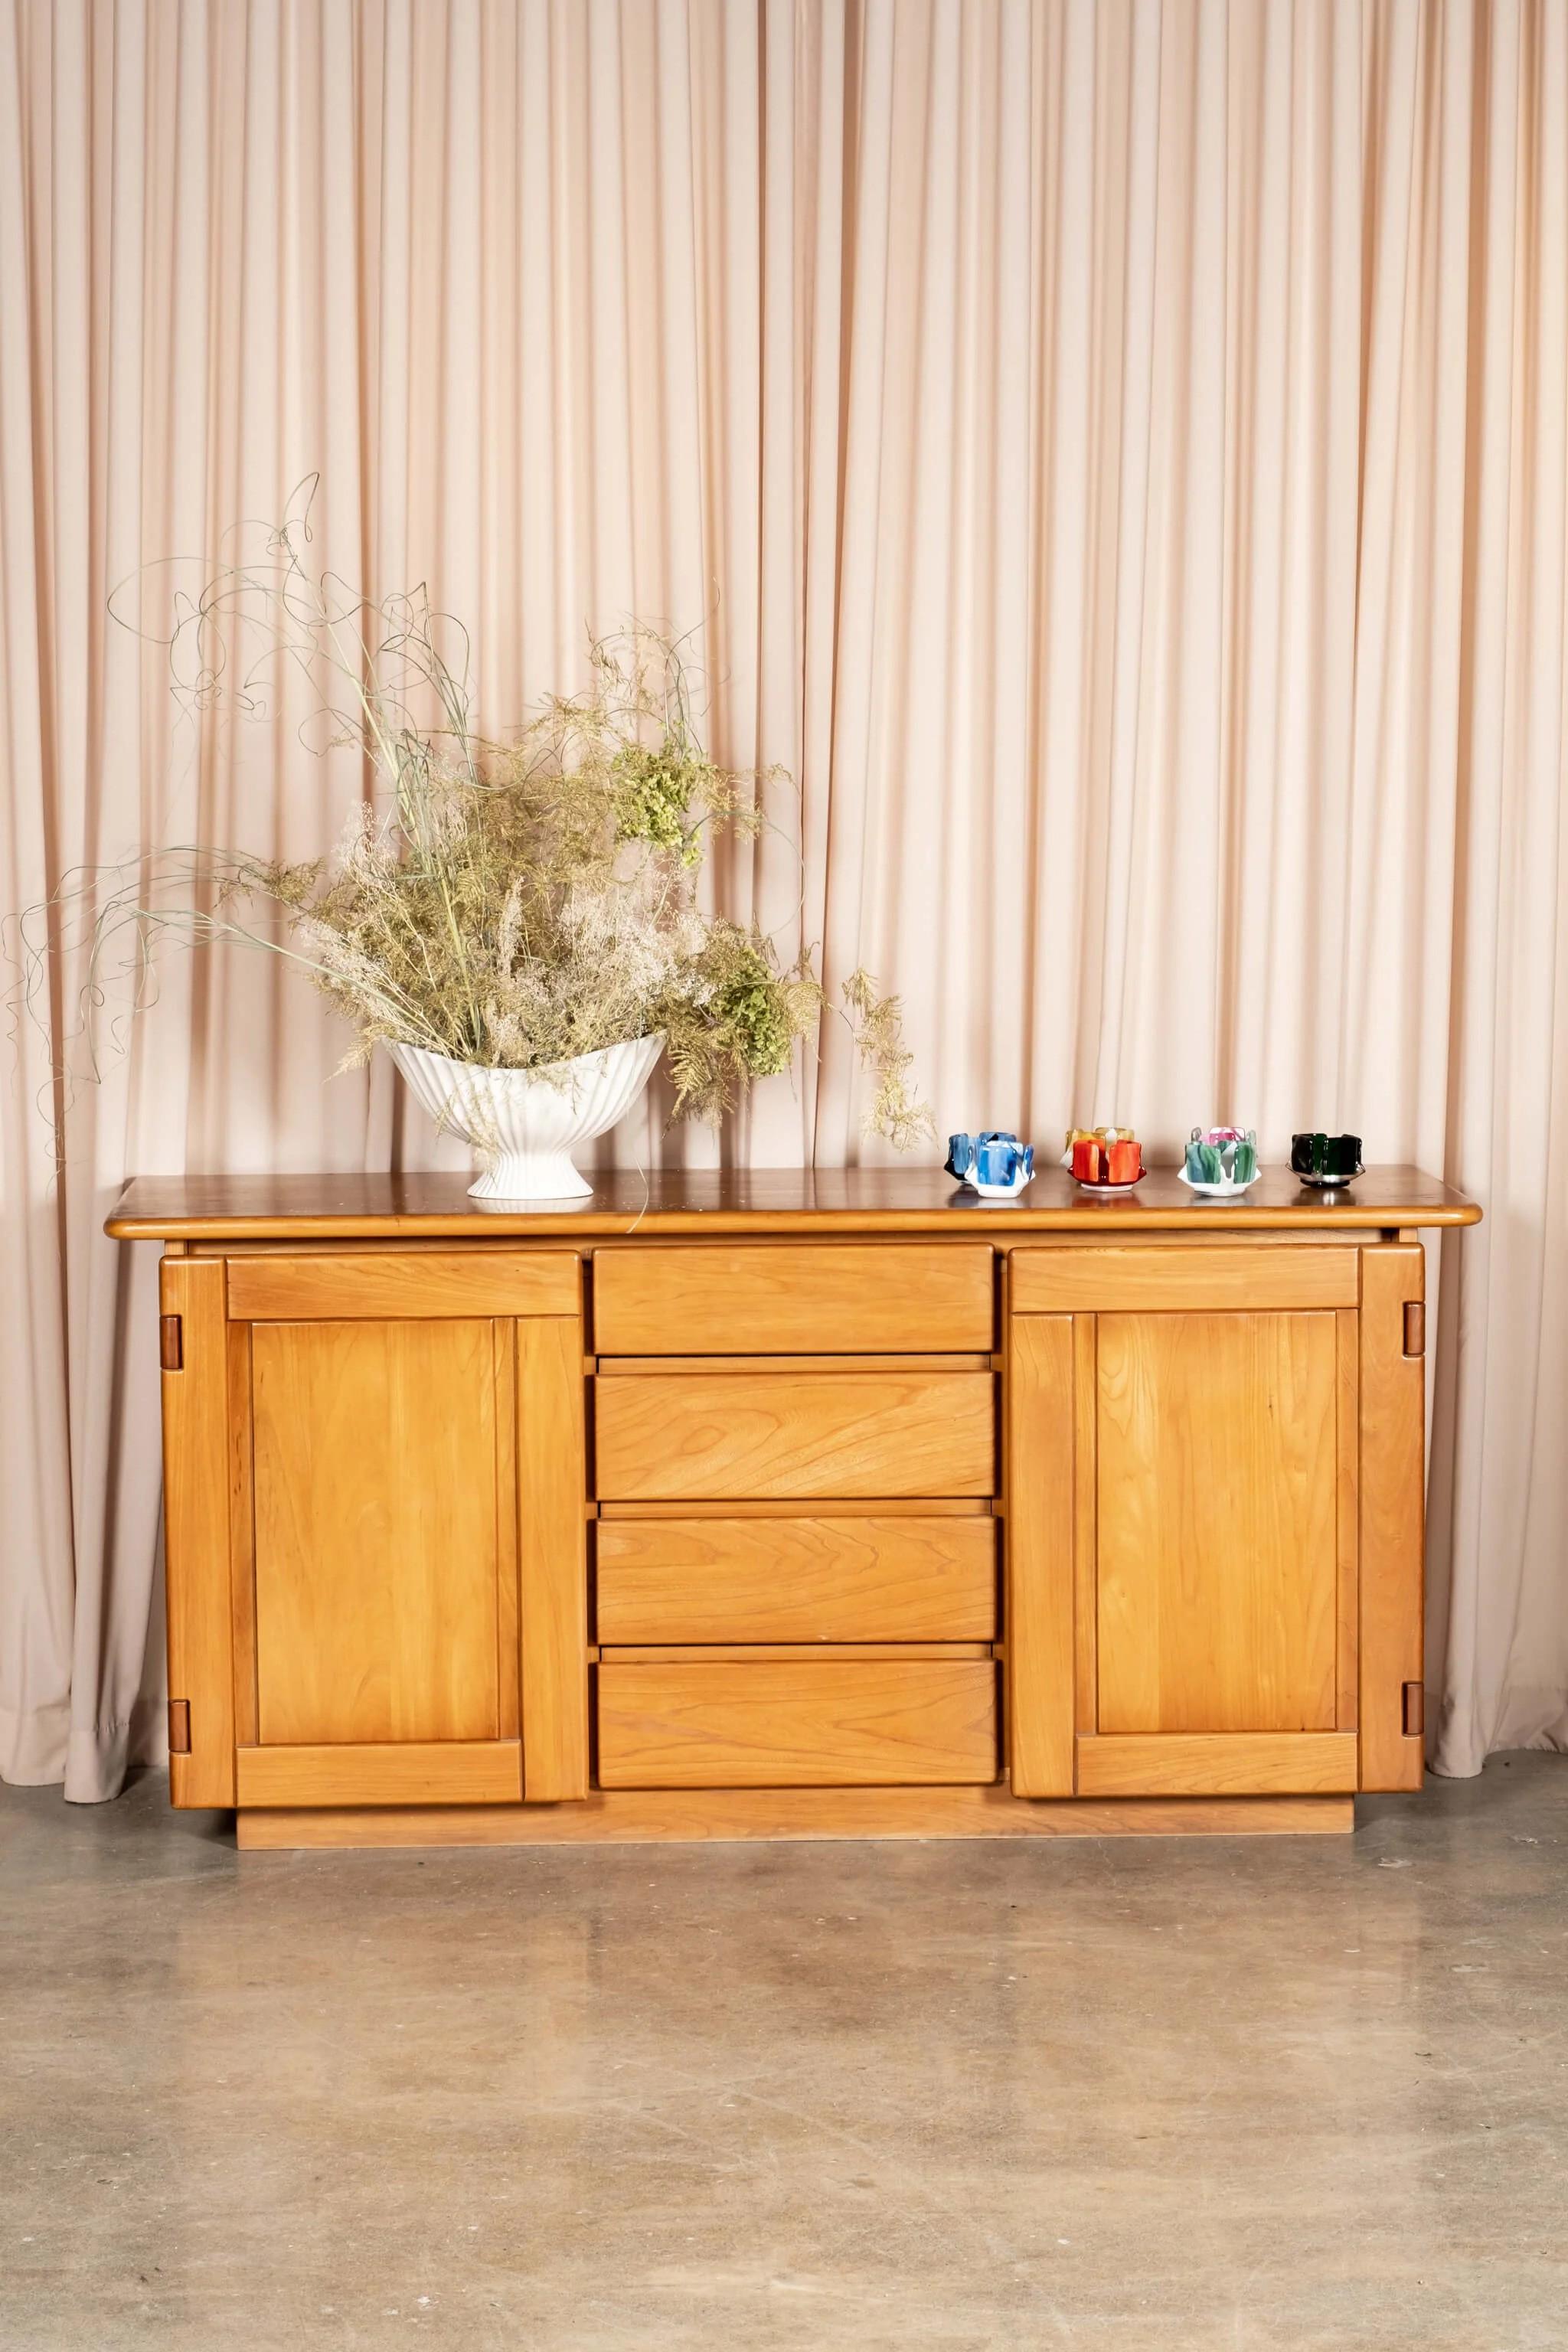 The impressive solid elm sideboard from French design house Maison Regain, in the style of Pierre Chapo, features 2 spacious doors and 4 drawers, all in their signature rounded wood. High quality fabrication and details, as is typical of Regain's